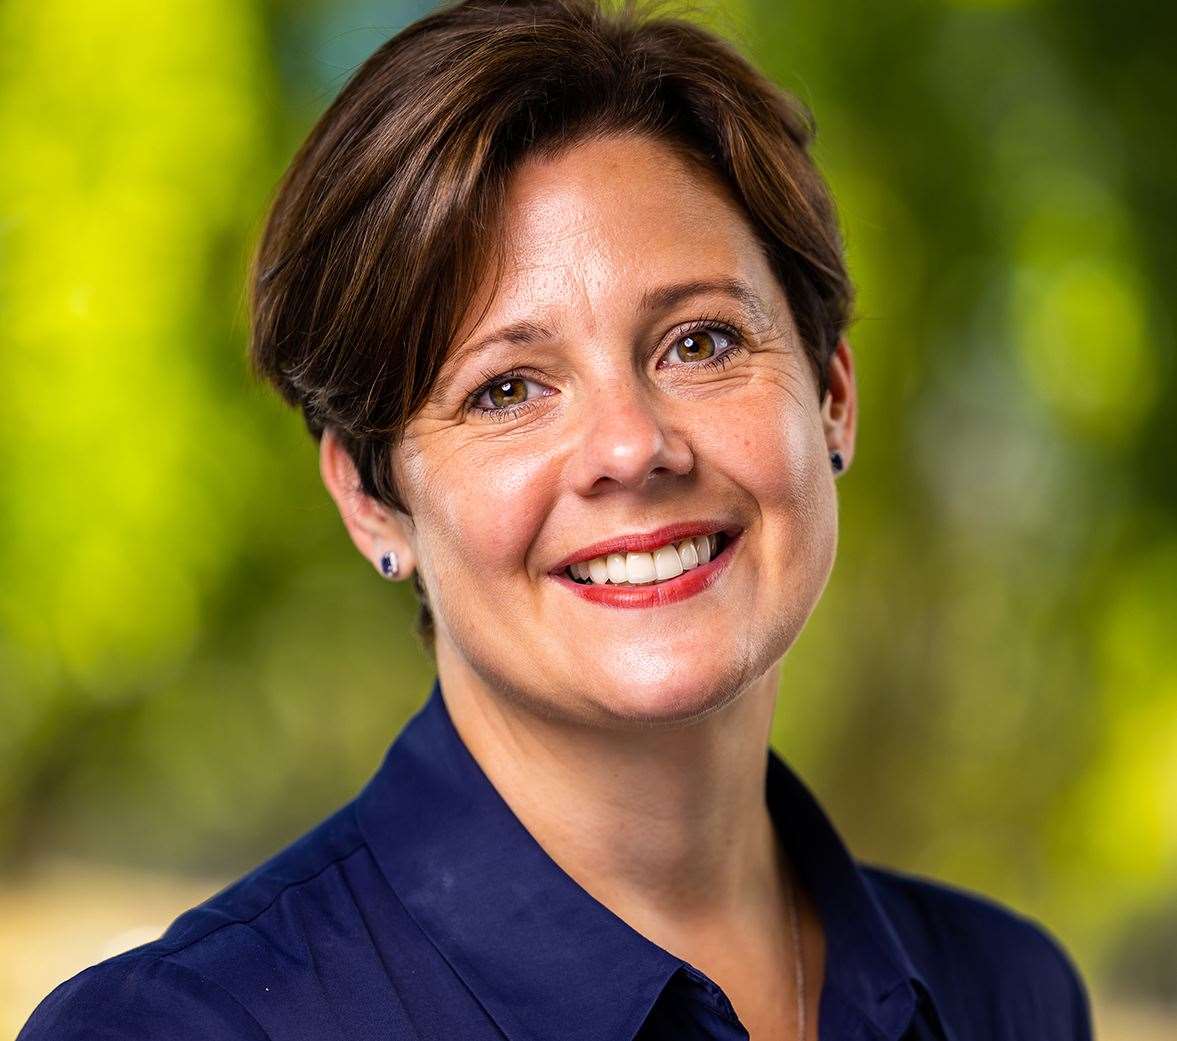 Katy Taylor, Chief Customer Officer of Southern Water